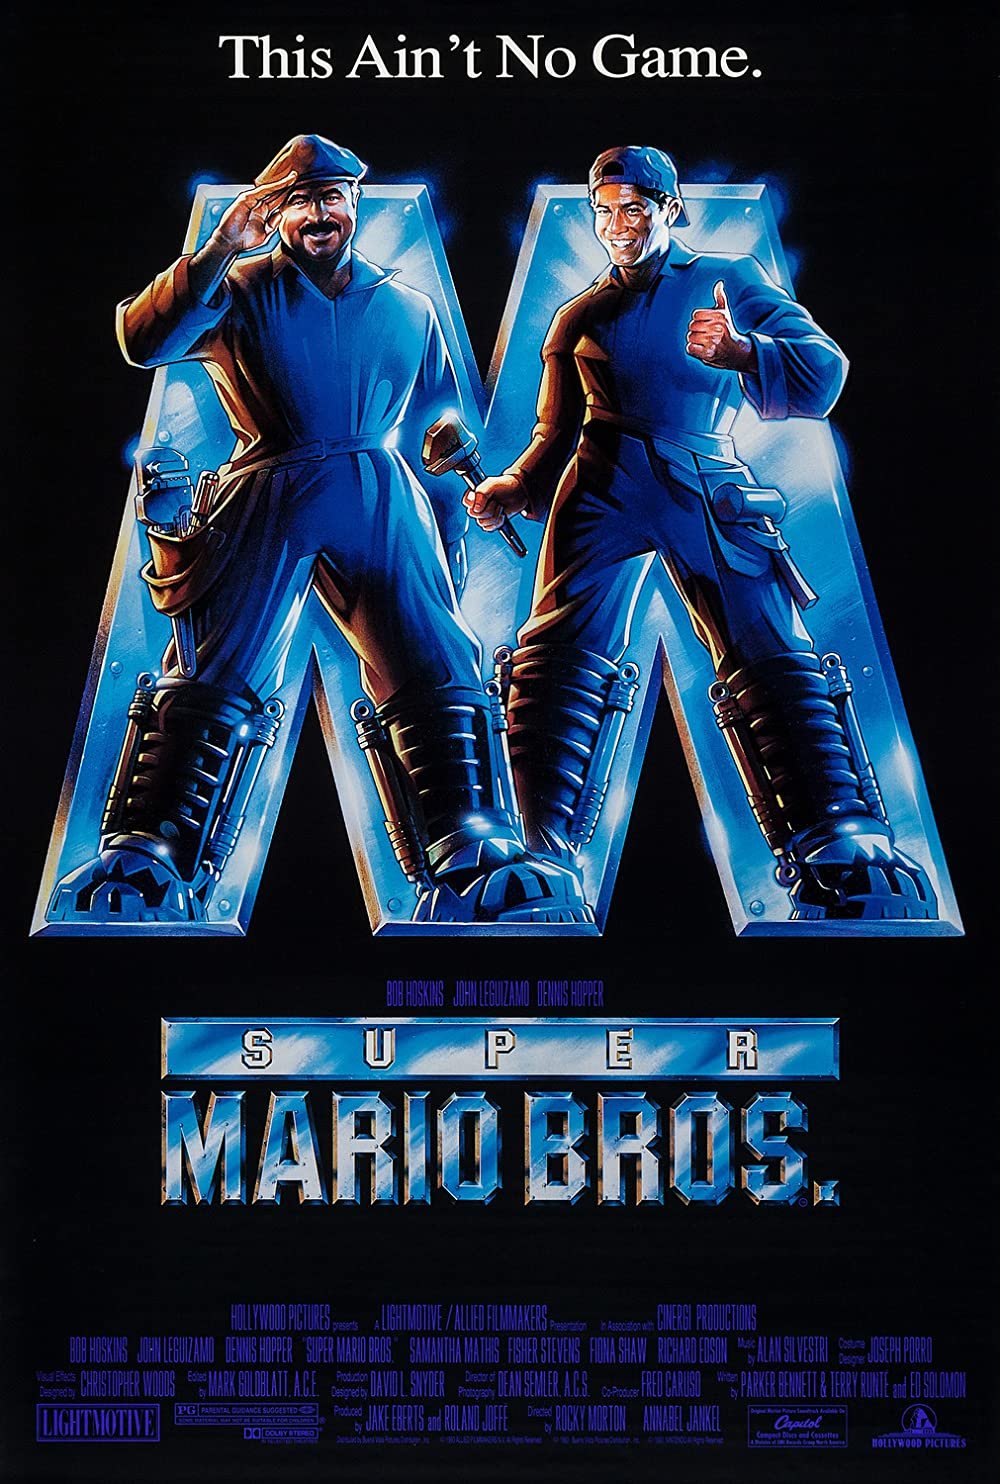 Super Mario Bros. image © Hollywood Pictures